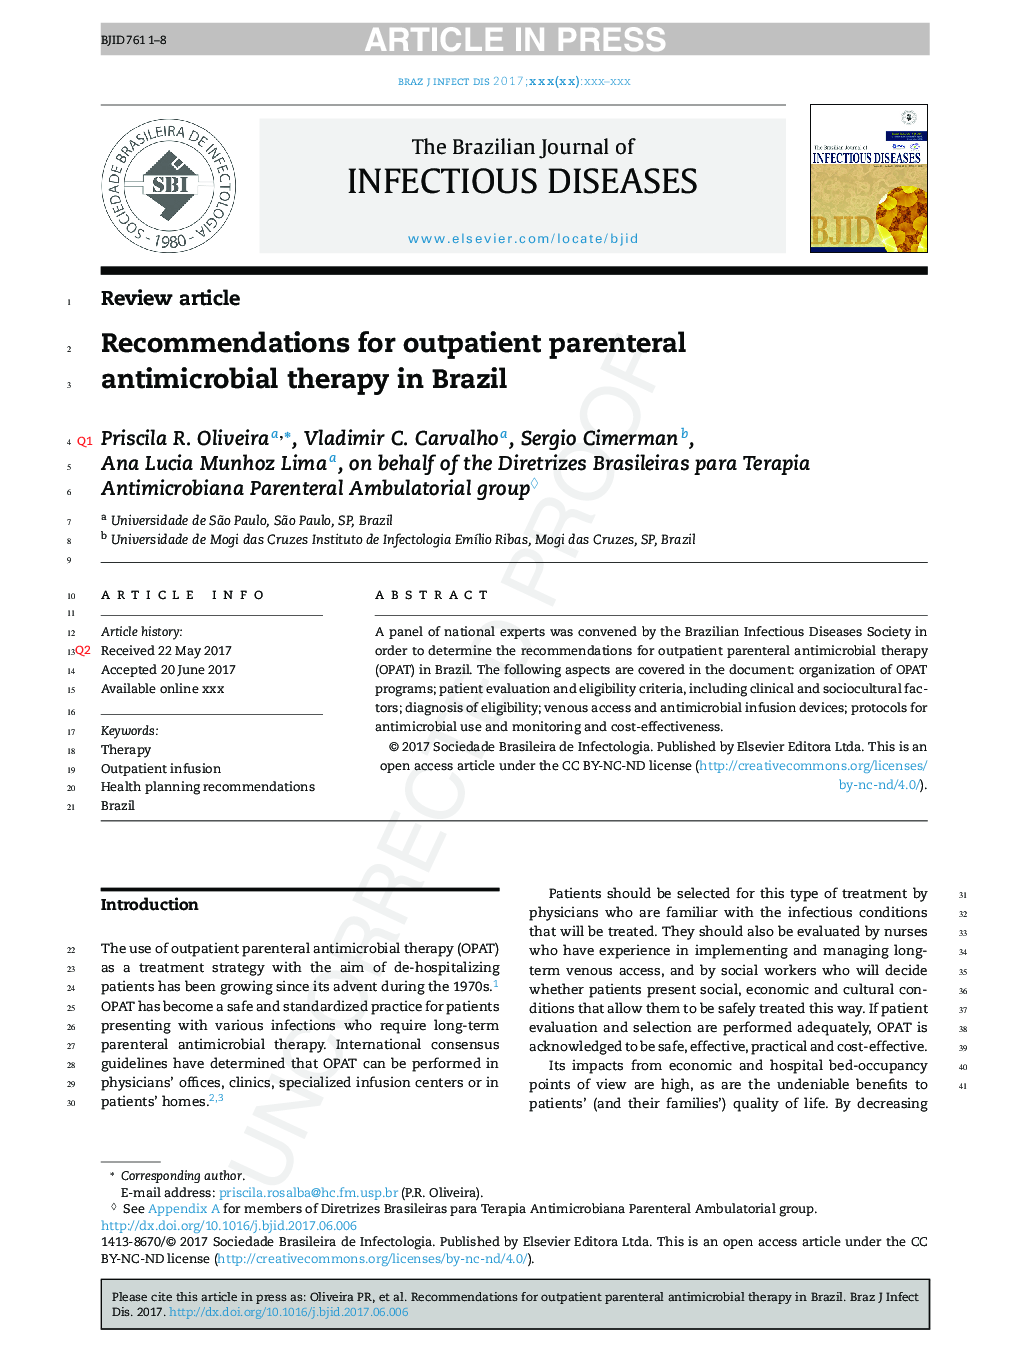 Recommendations for outpatient parenteral antimicrobial therapy in Brazil